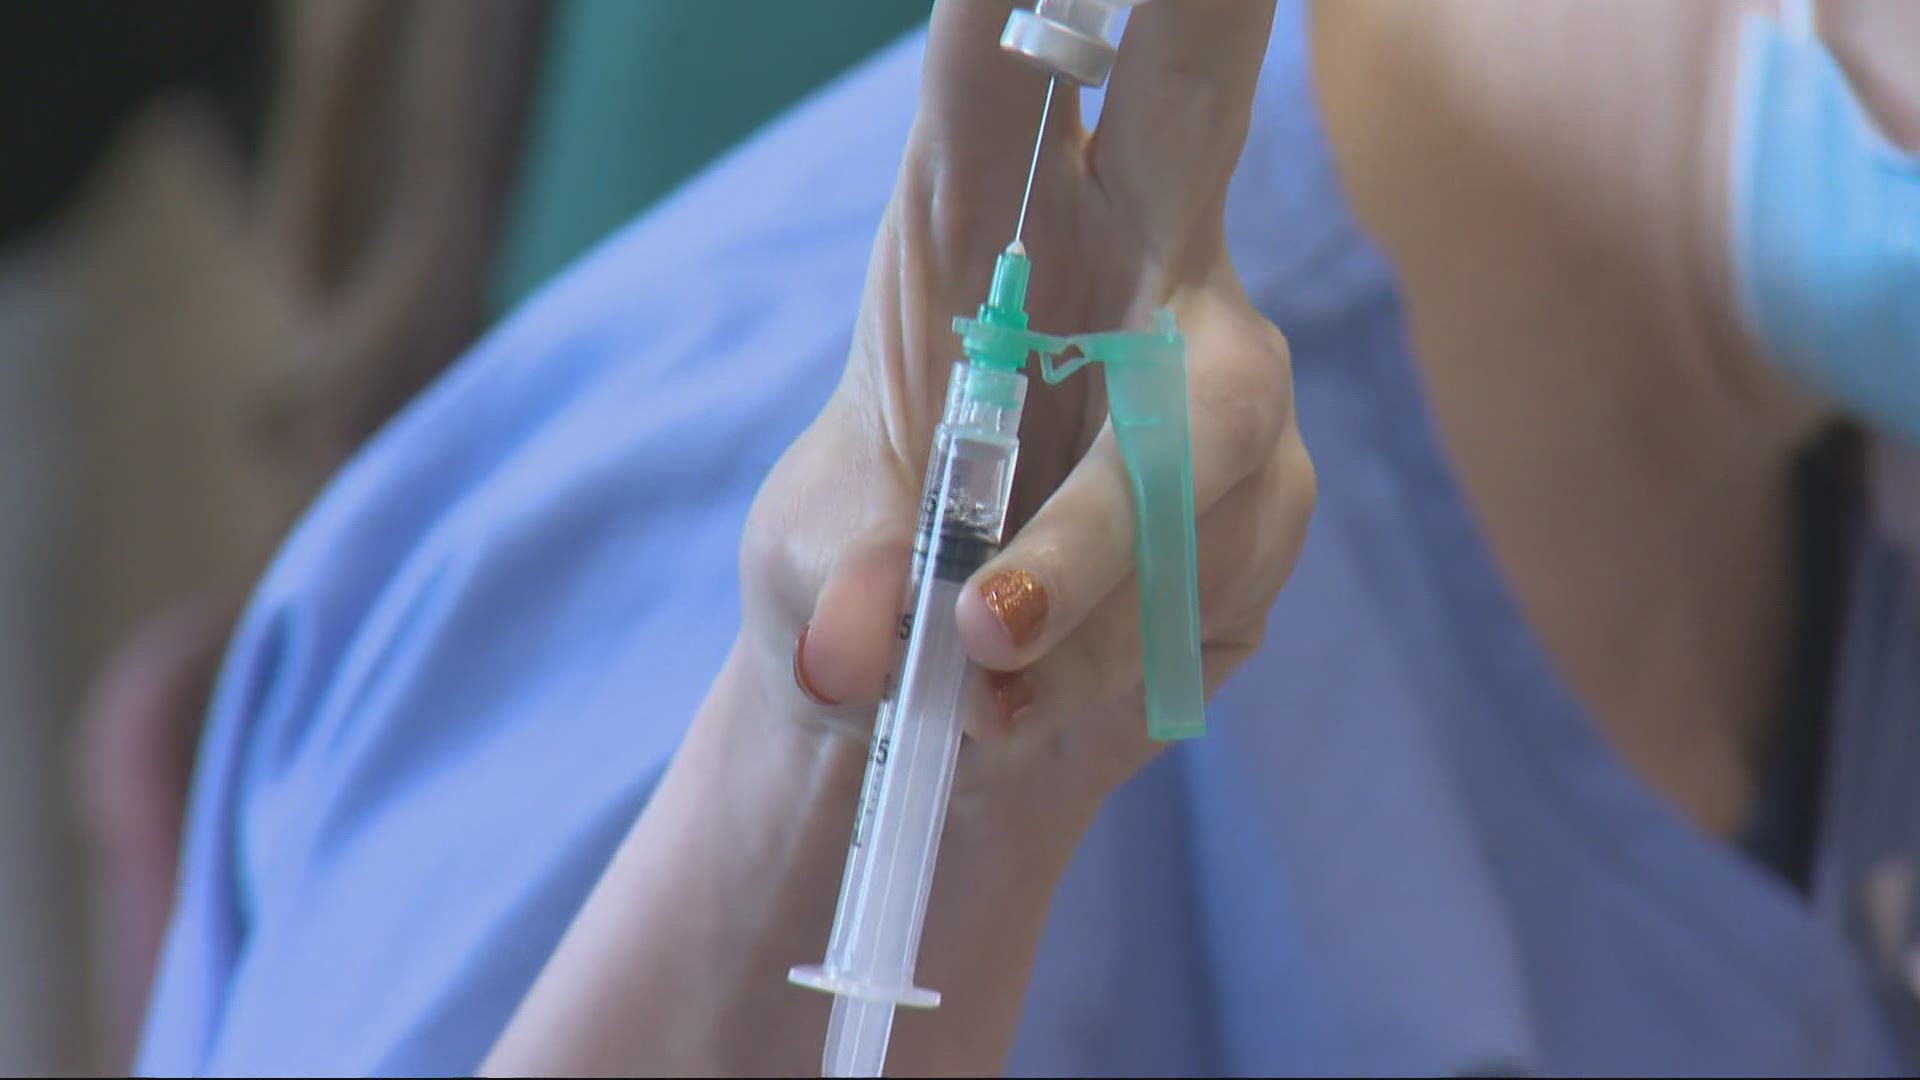 If your teenager is 15 or older they can be vaccinated in Oregon without parental consent.